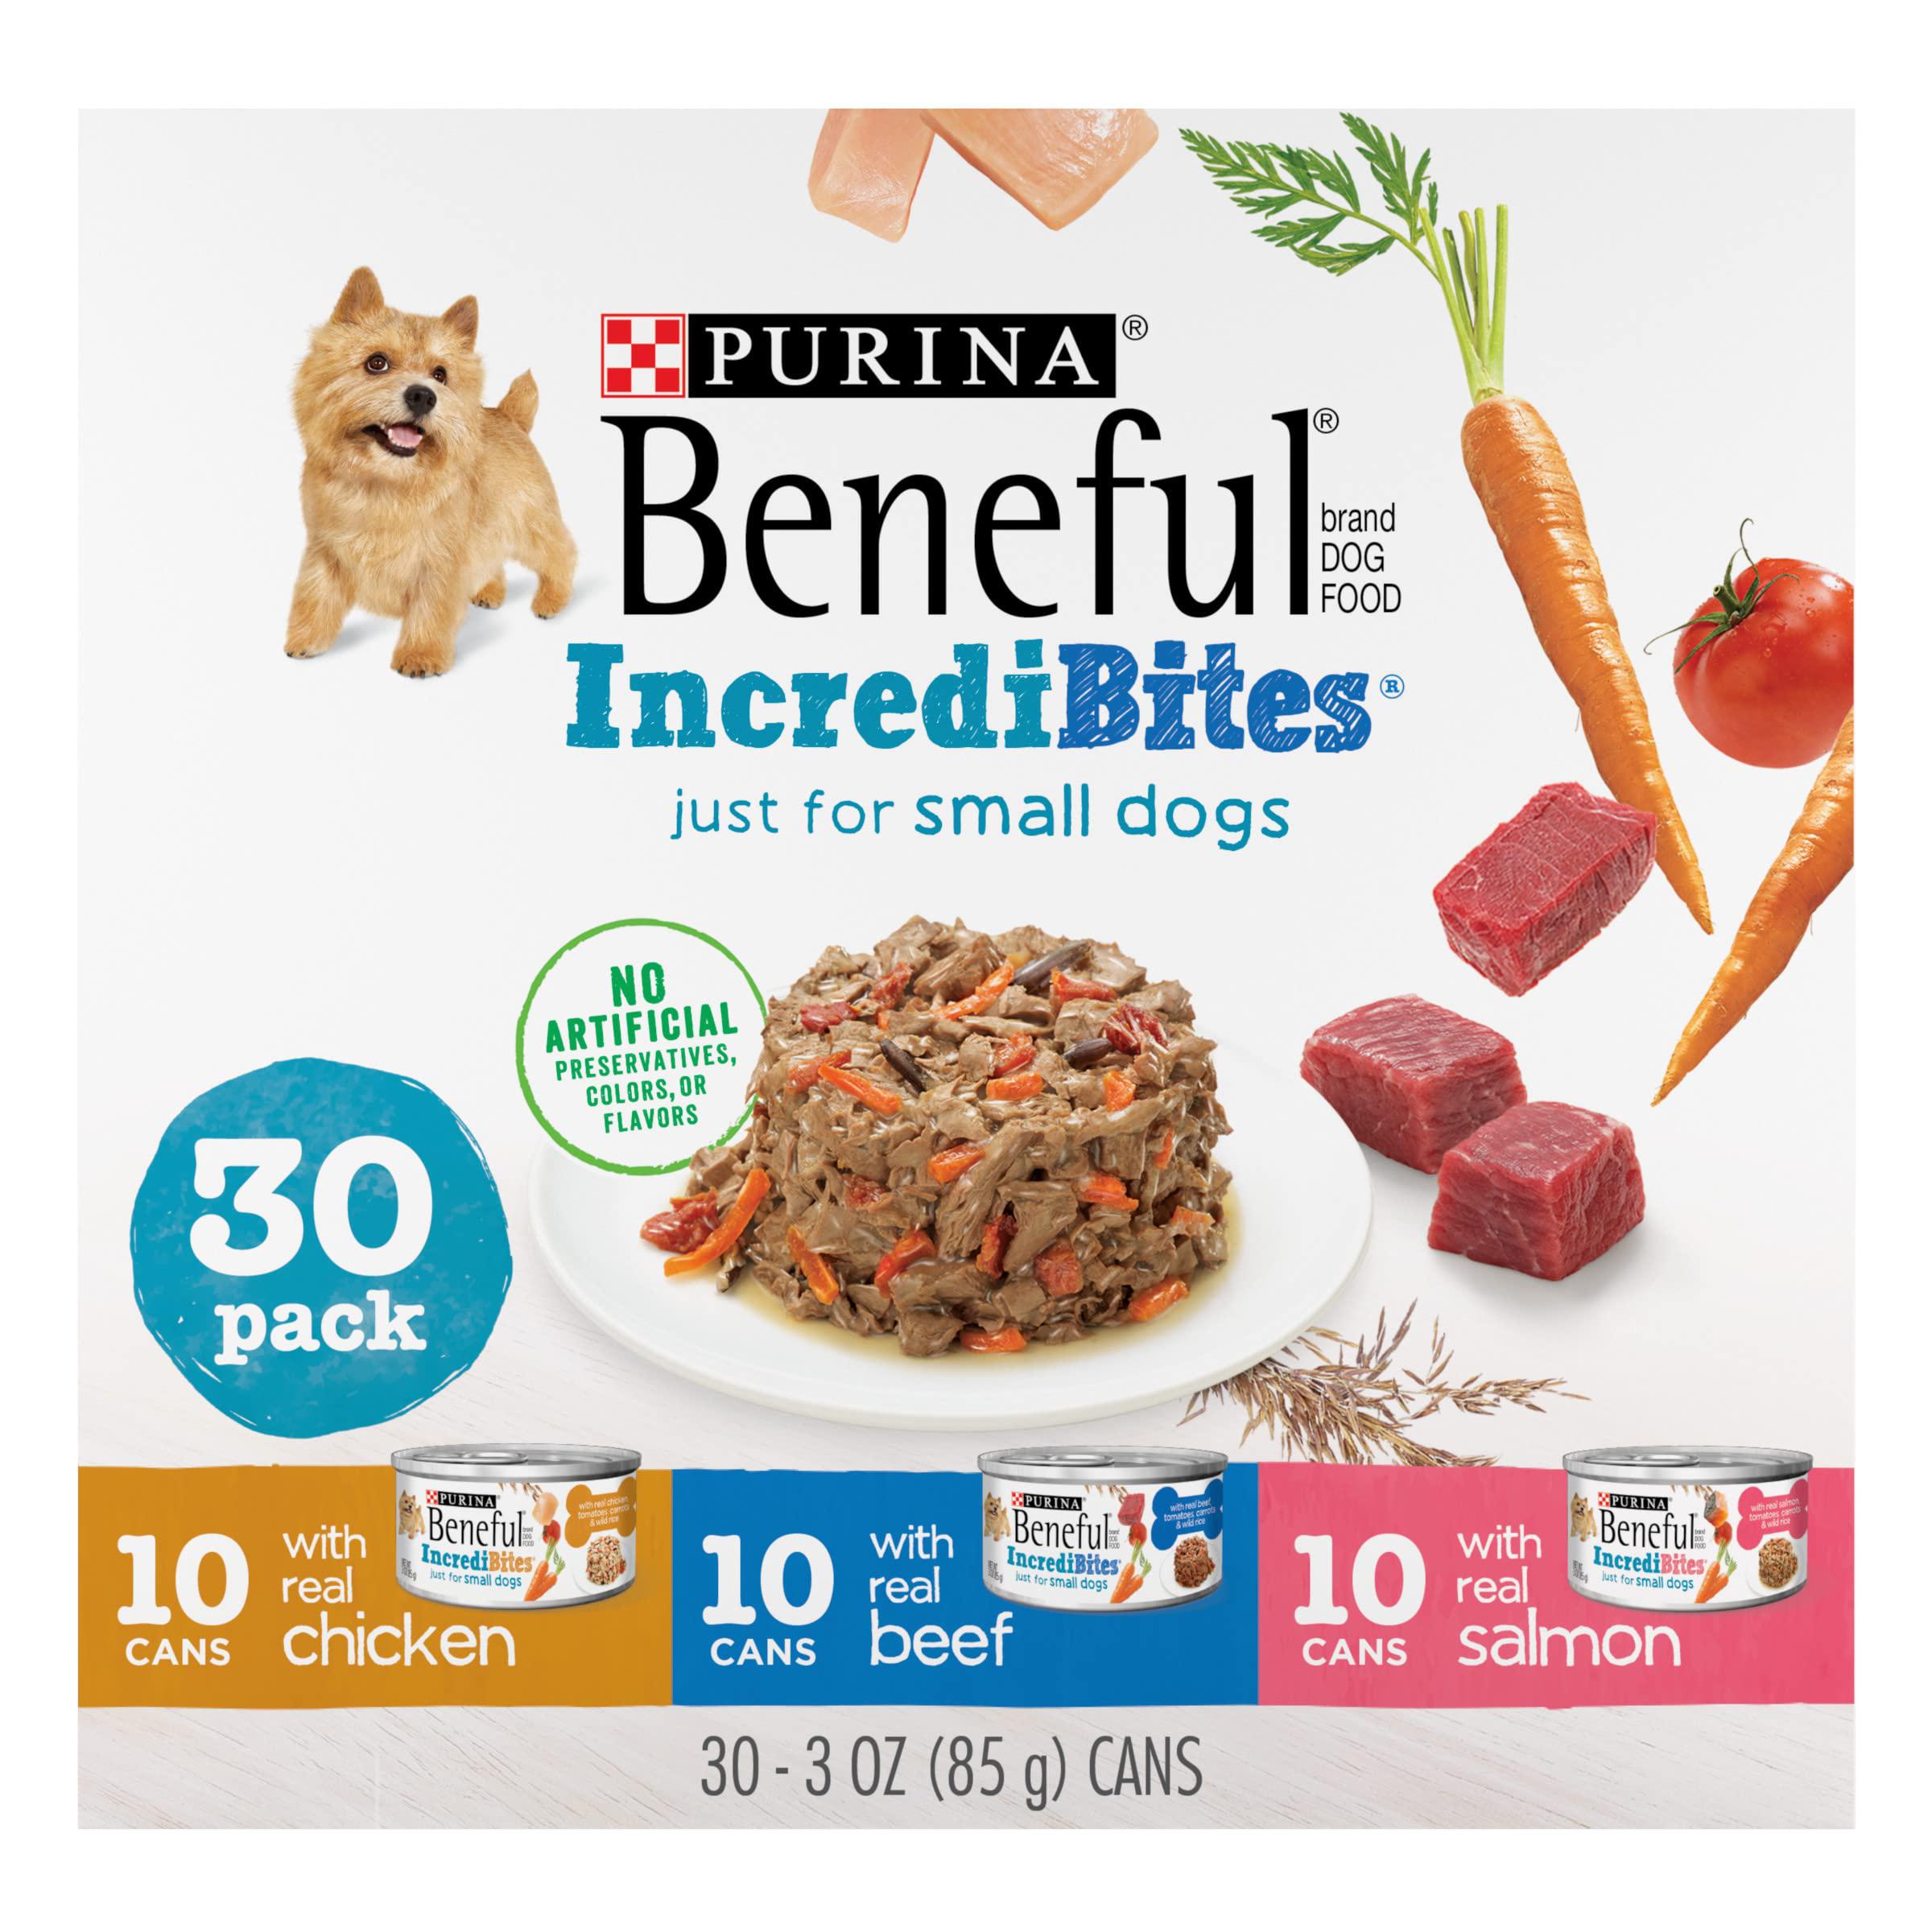 Beneful purina beneful small breed wet dog food variety pack, incredibites with real beef, chicken or salmon - (30) 3 oz. cans